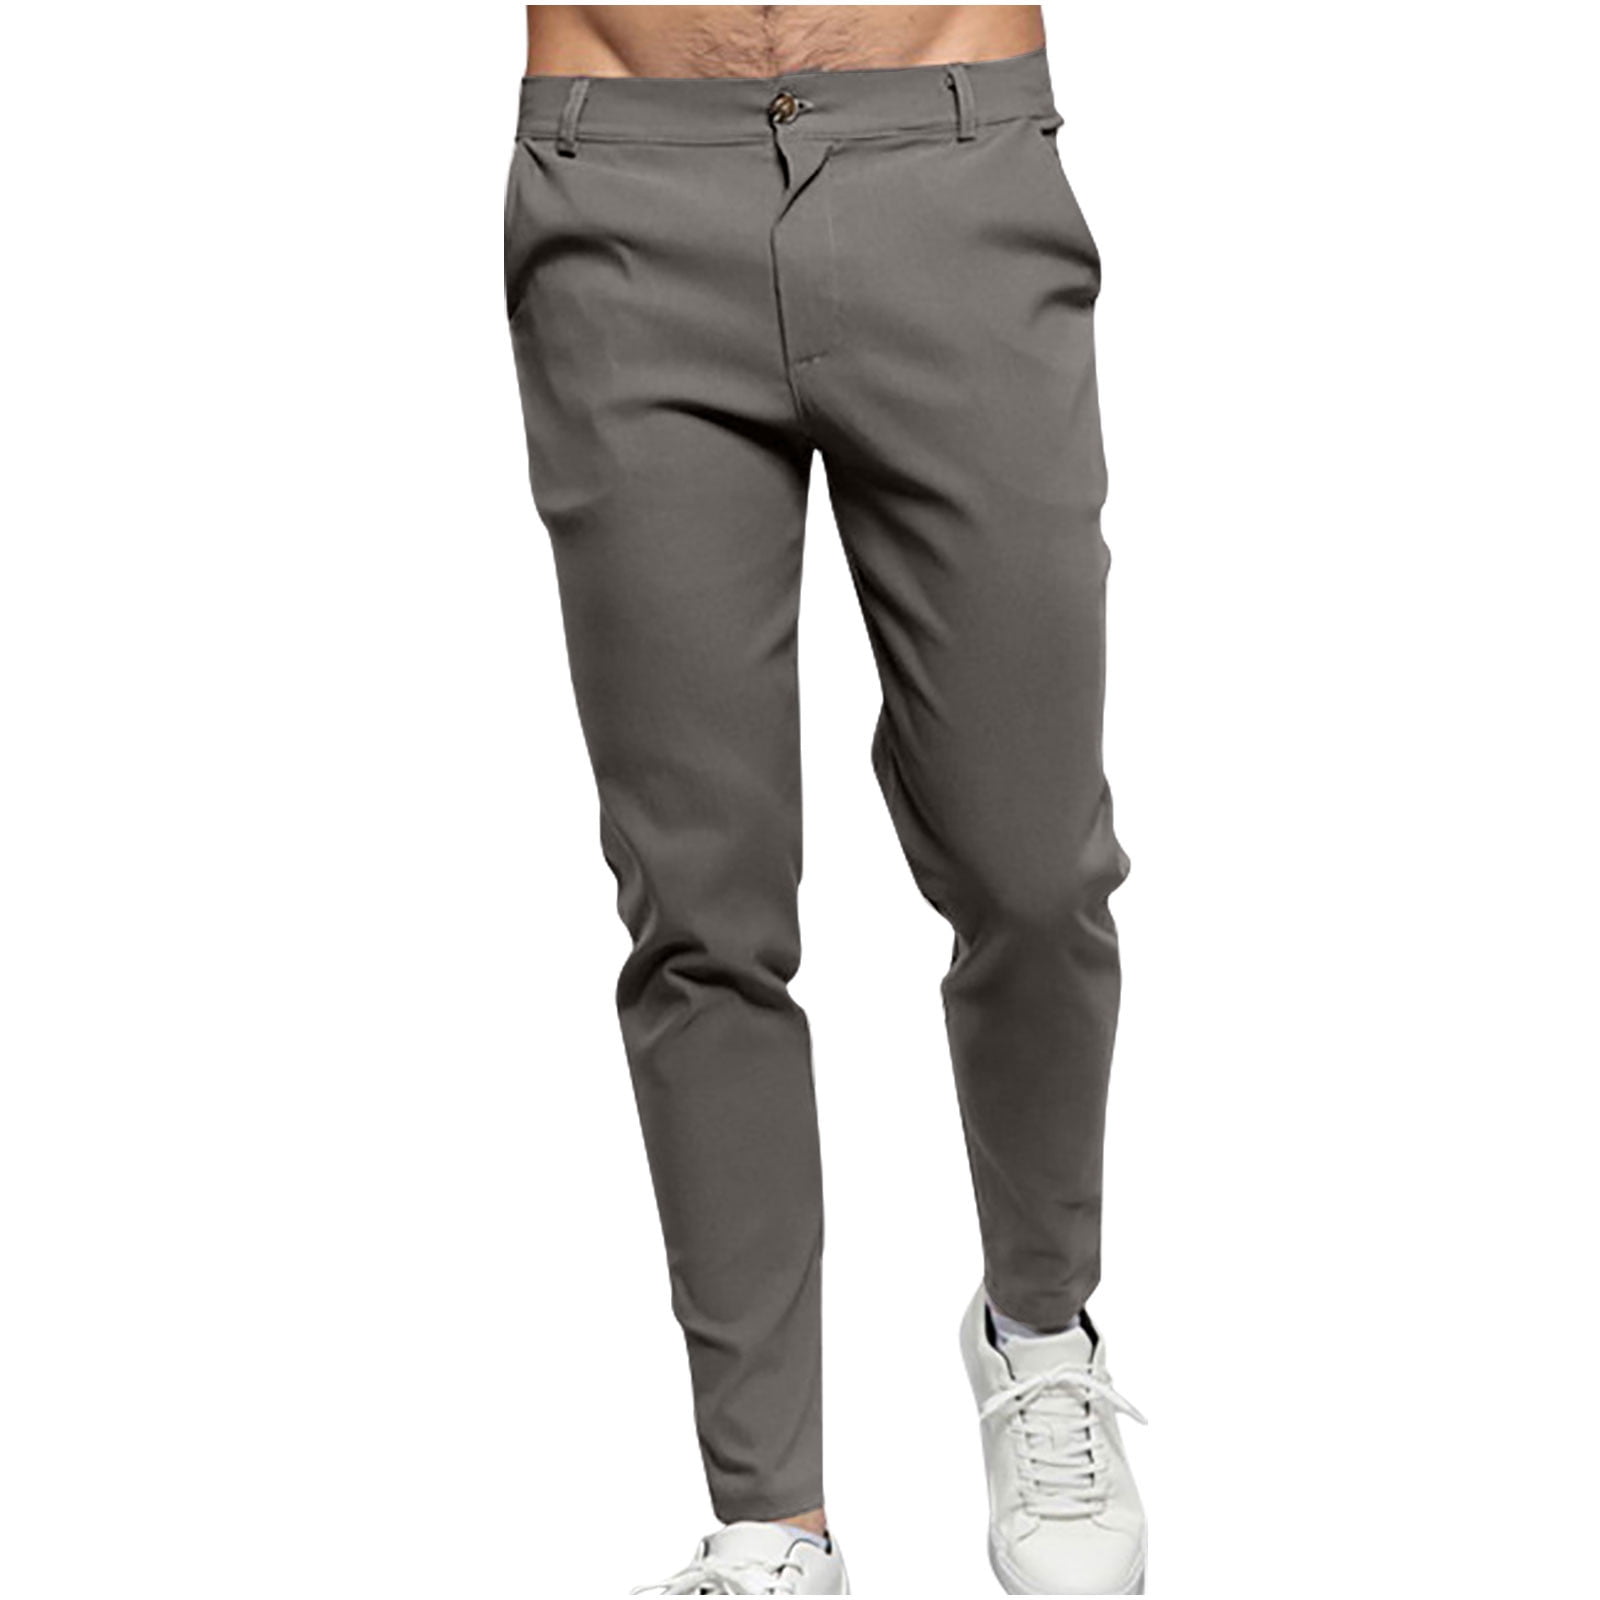 XFLWAM Chino Pants for Men Skinny Stretchy Pants Slim Fit Slacks Tapered  Trousers Button Zipper Casual Pencil Pants Gray S